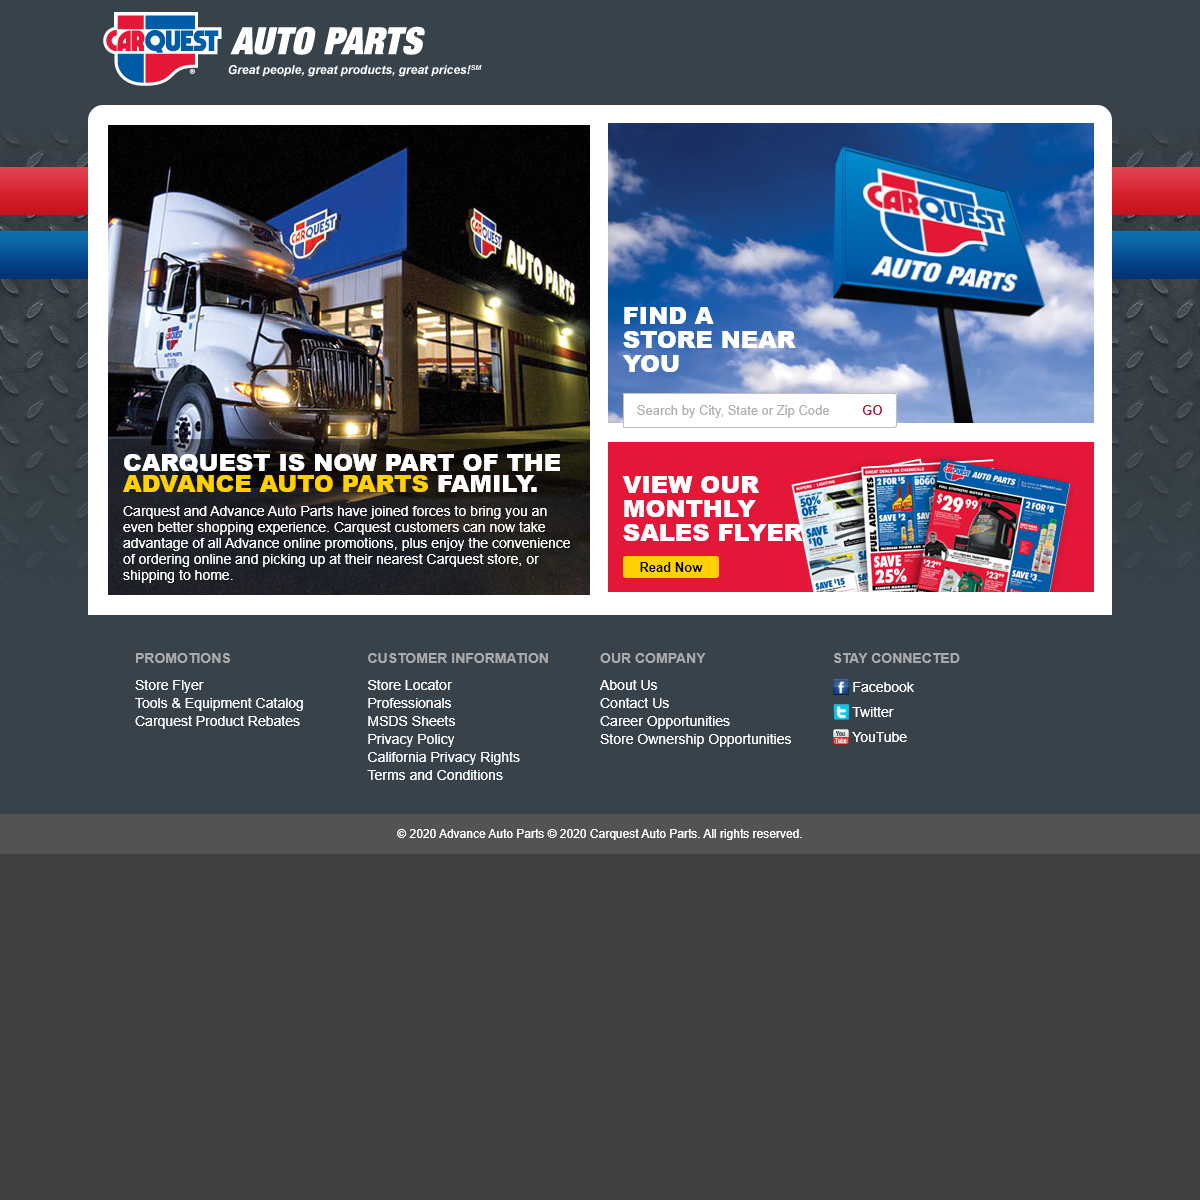 A complete backup of carquest.com